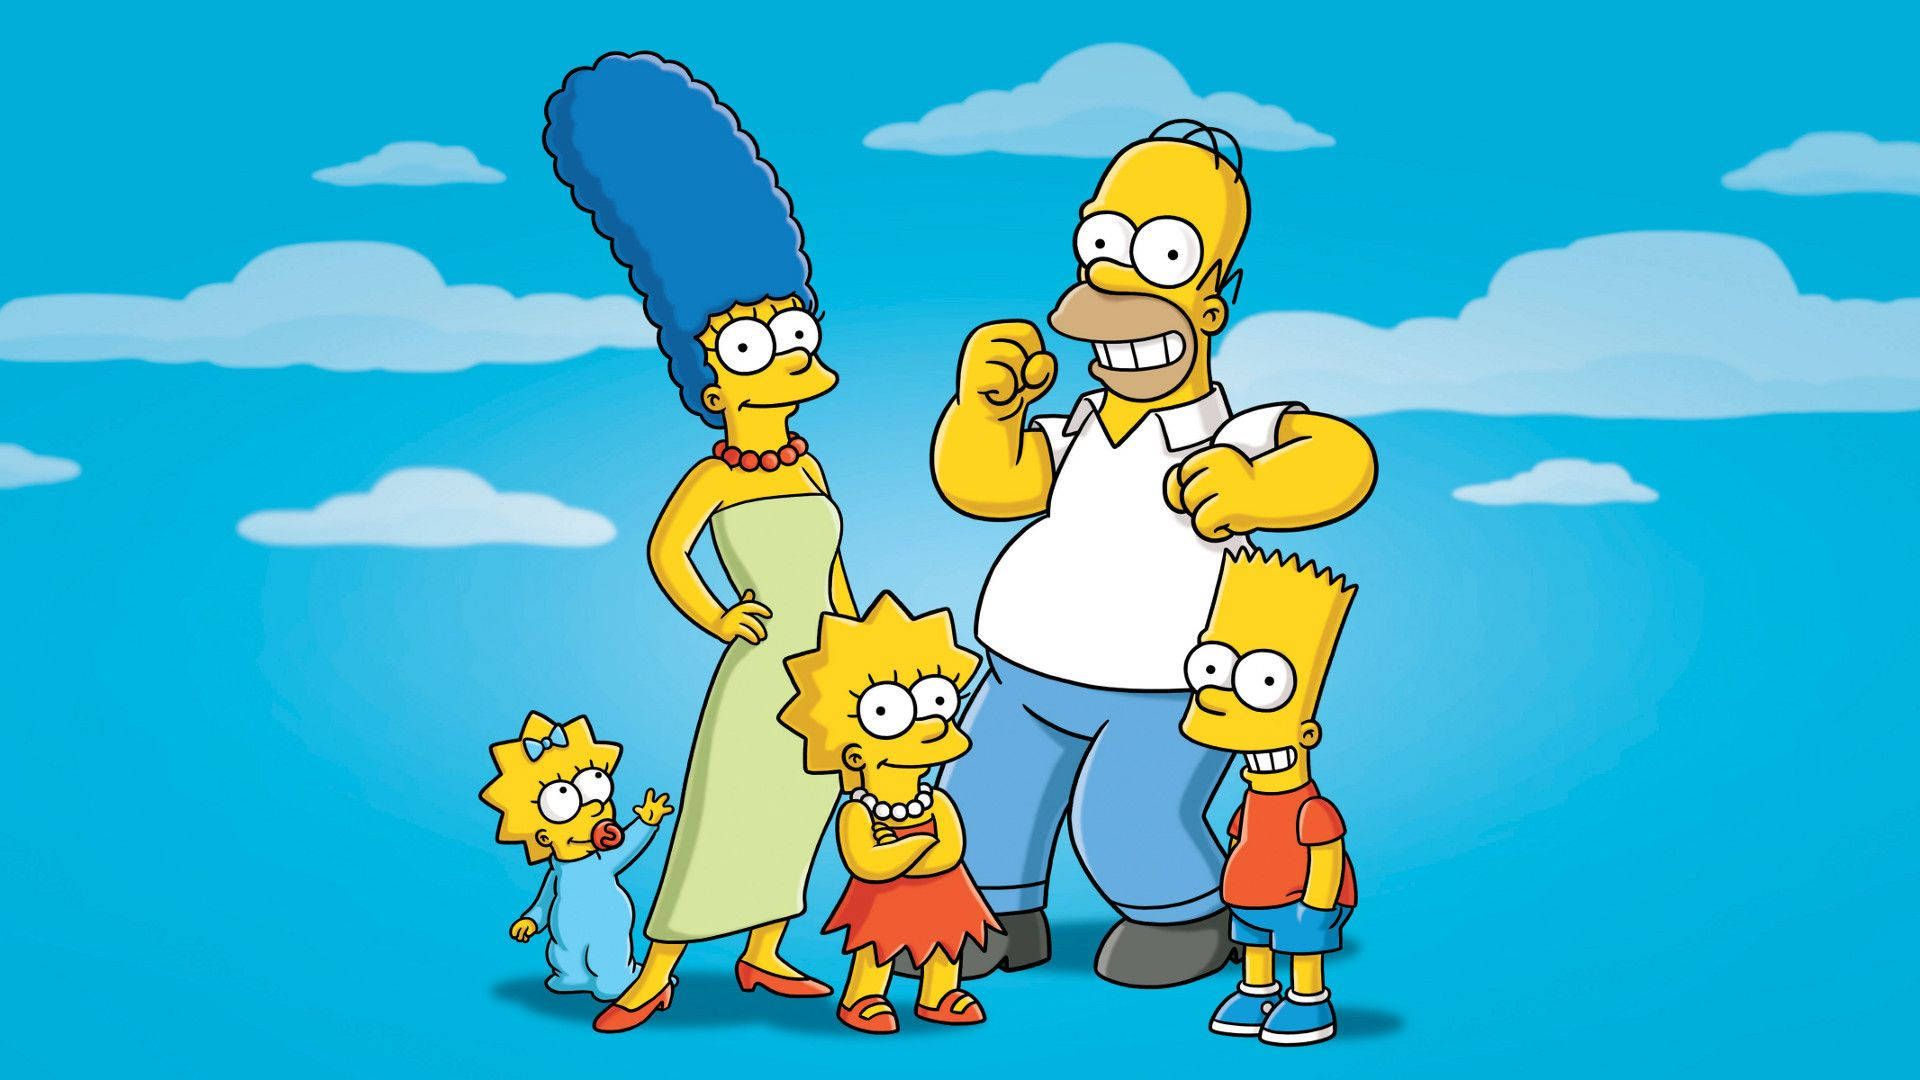 The Simpsons, the longest running scripted TV show, is a popular choice for many. - Homer Simpson